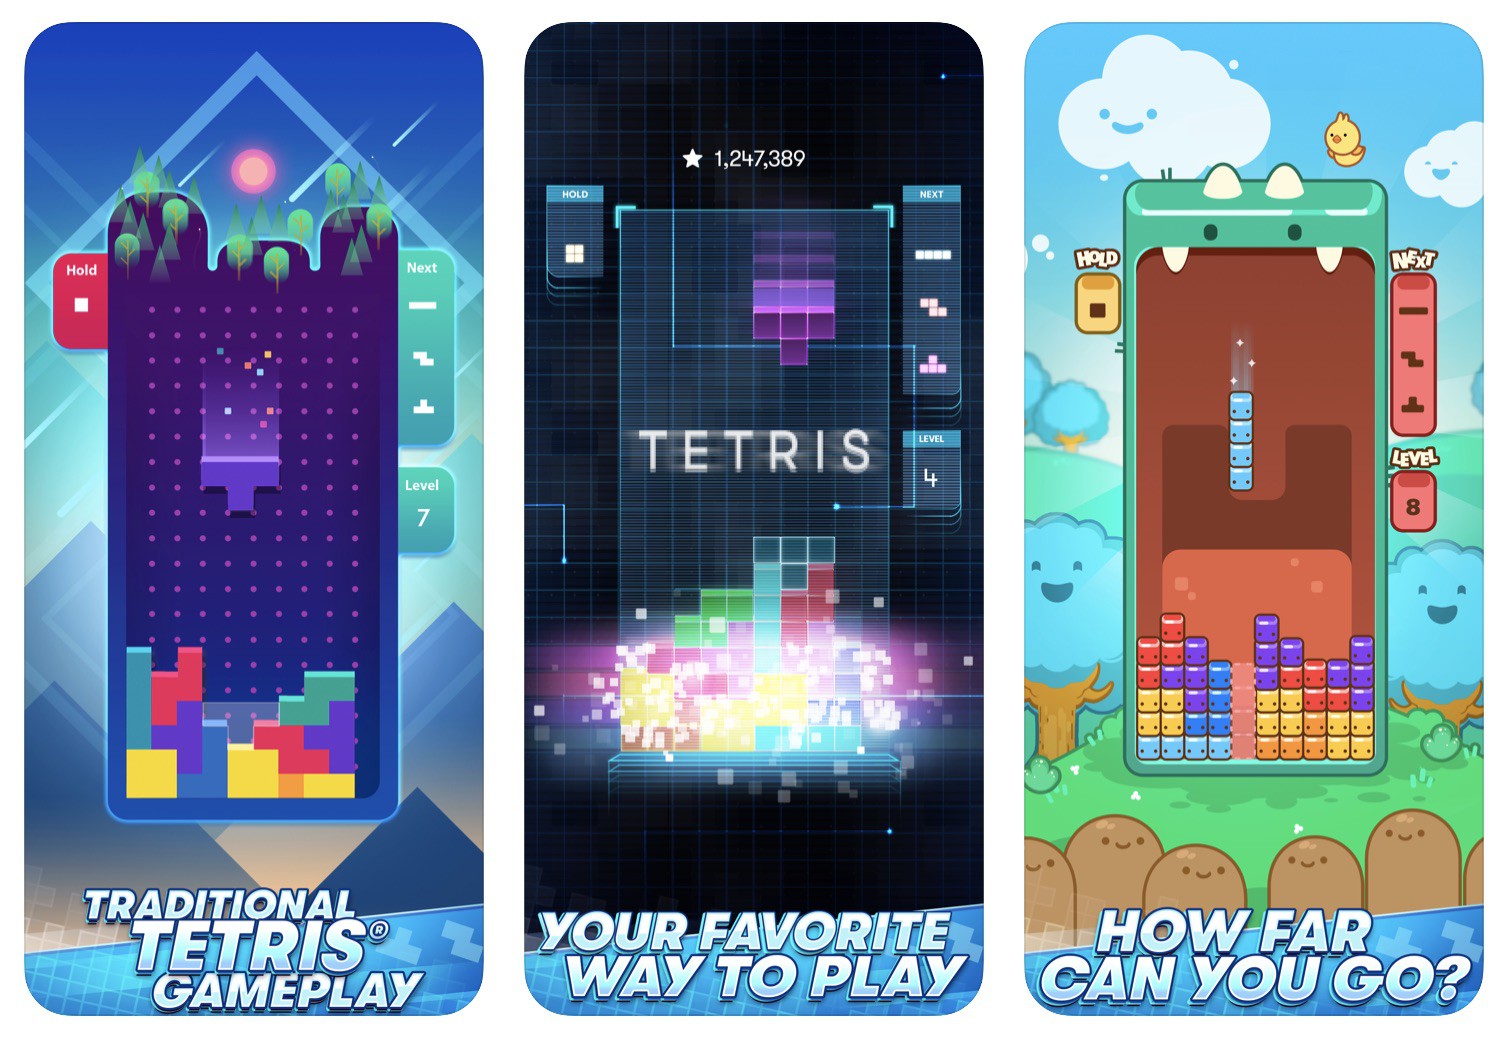 AllNew Tetris Game Debuts on App Store, Developed in Partnership With